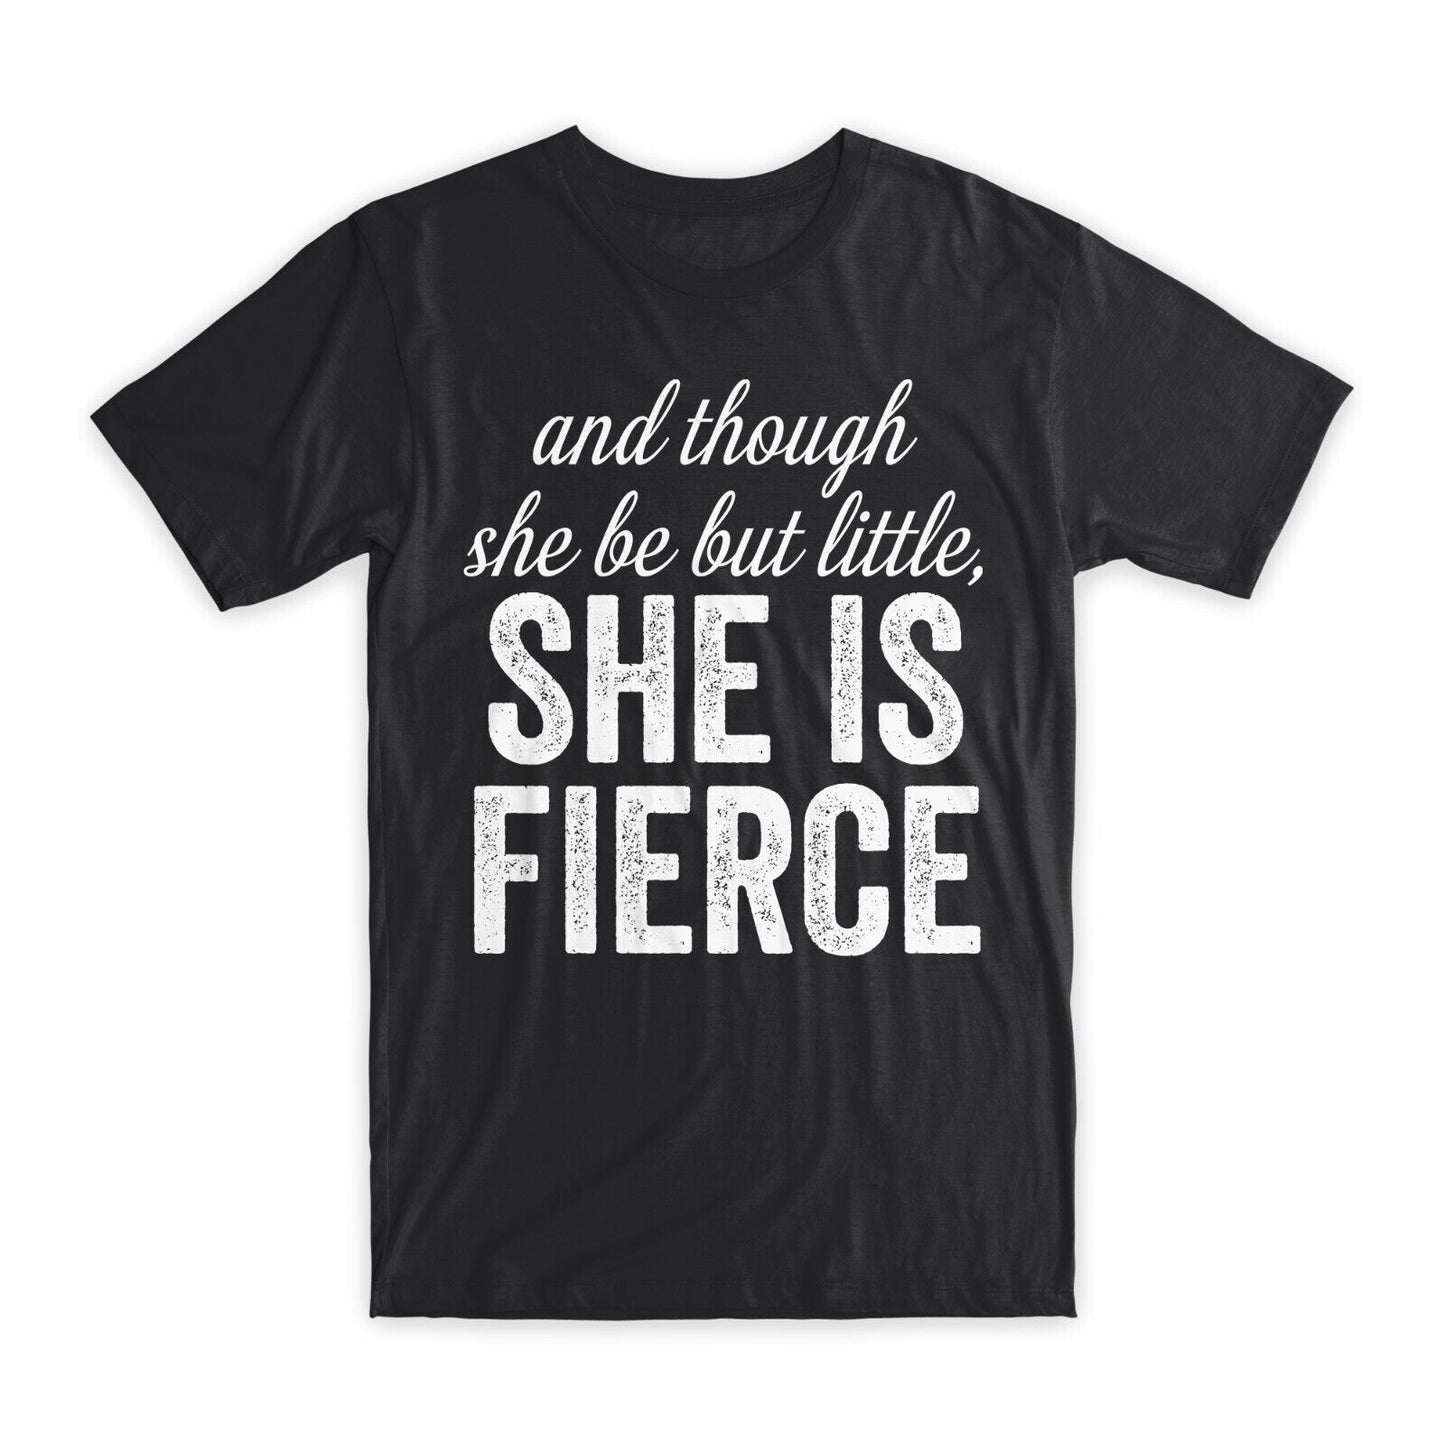 And Though She Be But Little, She is Fierce T-Shirt Premium Cotton Funny T NEW